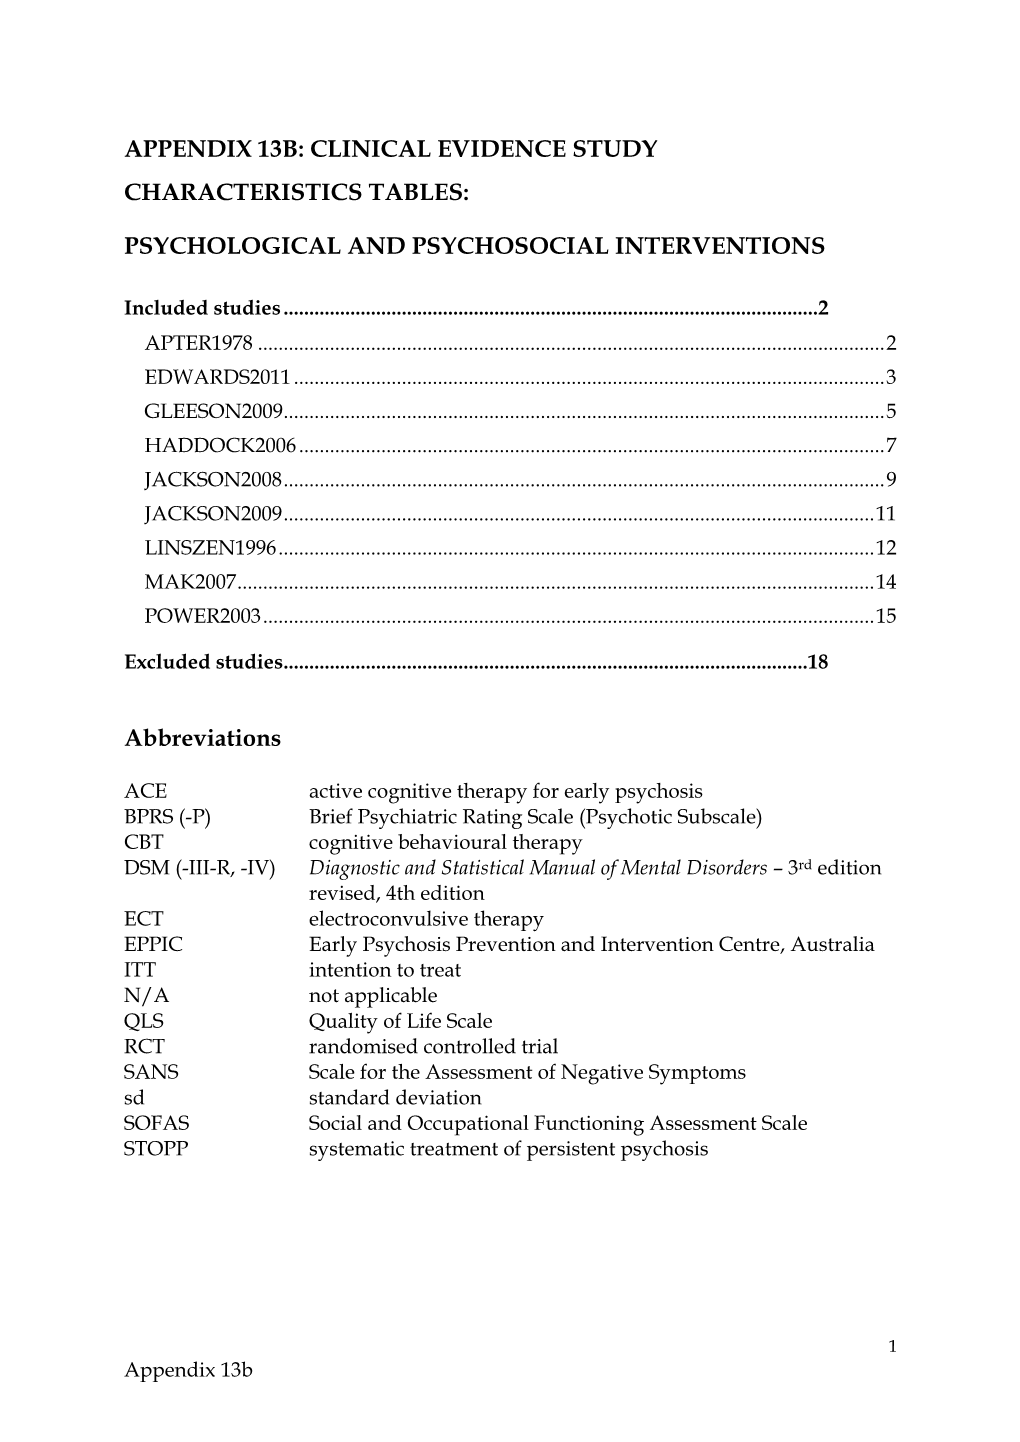 Psychological and Psychosocial Interventions